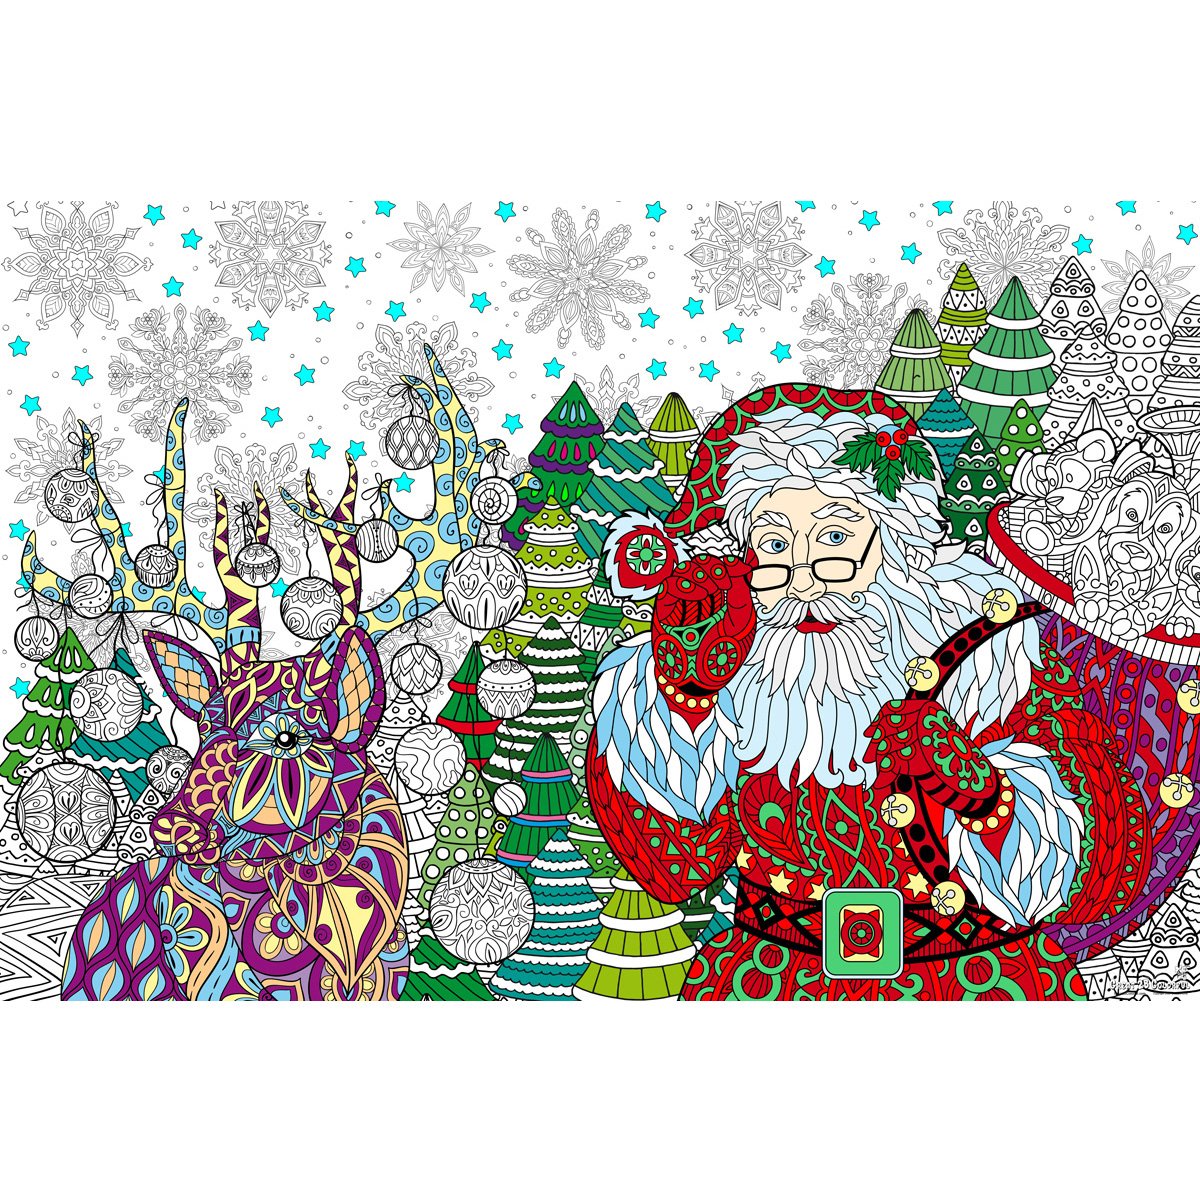 Great2bColorful Coloring Posters - North Pole